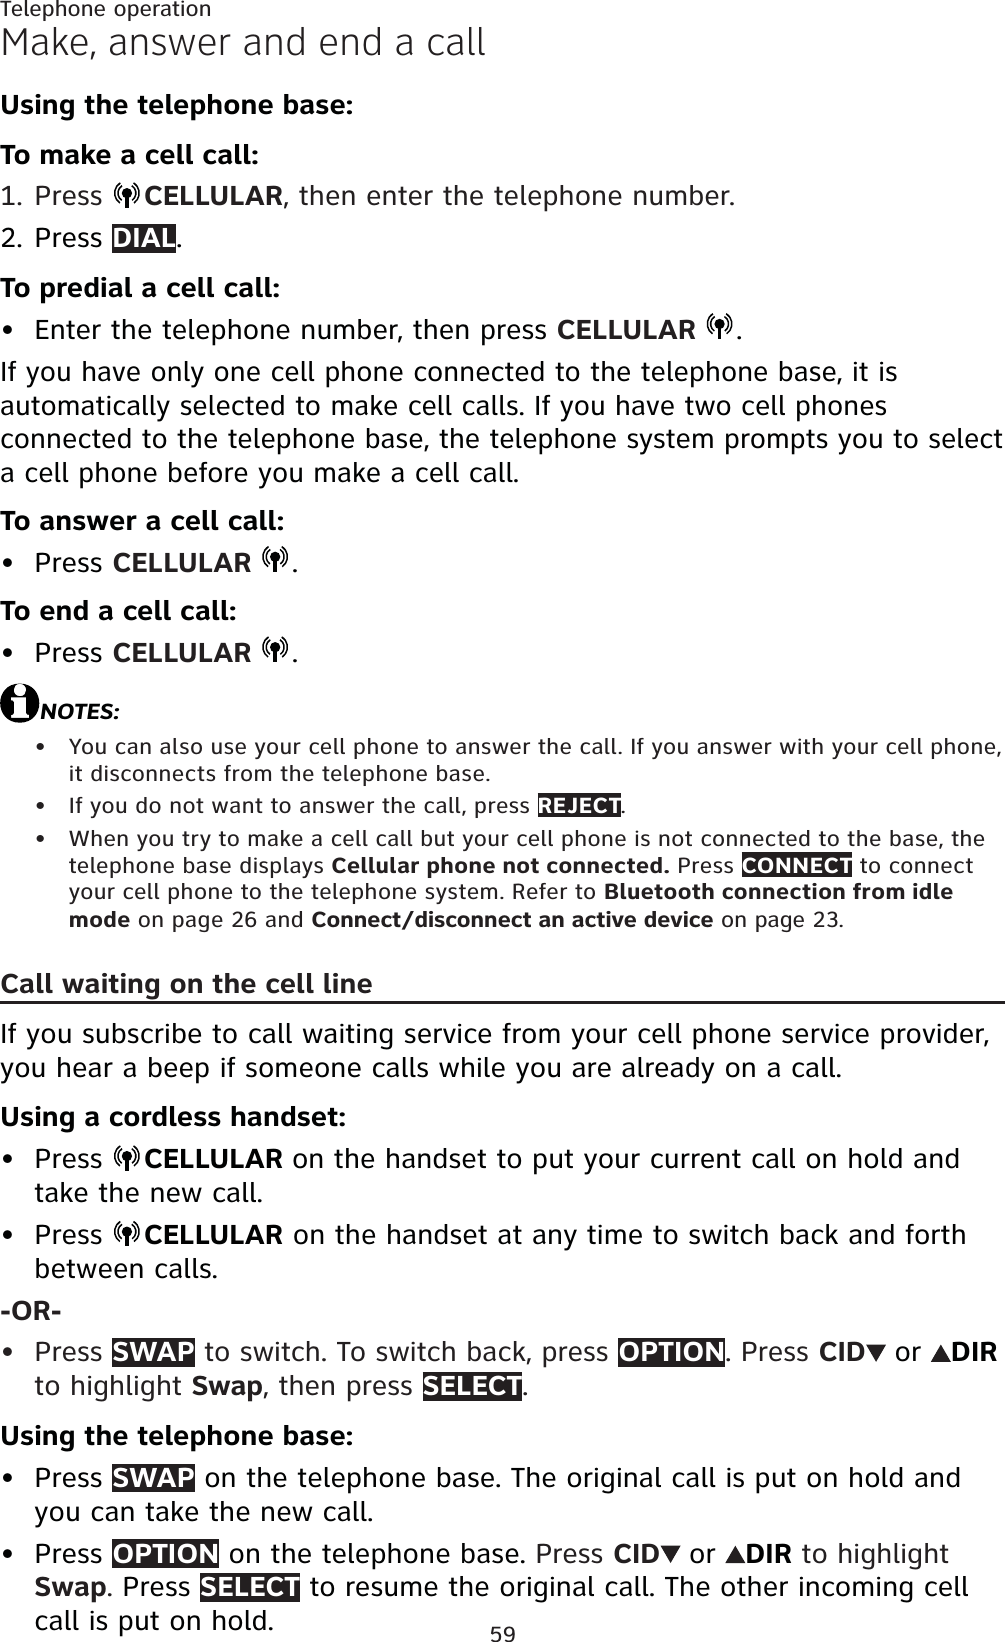 59Telephone operationMake, answer and end a callUsing the telephone base:To make a cell call:Press  CELLULAR, then enter the telephone number.Press DIAL.To predial a cell call:Enter the telephone number, then press CELLULAR  .If you have only one cell phone connected to the telephone base, it is automatically selected to make cell calls. If you have two cell phones connected to the telephone base, the telephone system prompts you to select a cell phone before you make a cell call.To answer a cell call:Press CELLULAR  .To end a cell call:Press CELLULAR  .NOTES:You can also use your cell phone to answer the call. If you answer with your cell phone, it disconnects from the telephone base.If you do not want to answer the call, press REJECT.When you try to make a cell call but your cell phone is not connected to the base, the telephone base displays Cellular phone not connected. Press CONNECT to connect your cell phone to the telephone system. Refer to Bluetooth connection from idle mode on page 26 and Connect/disconnect an active device on page 23.Call waiting on the cell lineIf you subscribe to call waiting service from your cell phone service provider, you hear a beep if someone calls while you are already on a call.Using a cordless handset:Press  CELLULAR on the handset to put your current call on hold and take the new call.Press  CELLULAR on the handset at any time to switch back and forth between calls.-OR-Press SWAP to switch. To switch back, press OPTION. Press CID or DIRto highlight Swap, then press SELECT.Using the telephone base:Press SWAP on the telephone base. The original call is put on hold and you can take the new call.Press OPTION on the telephone base. Press CID or DIR to highlight Swap.Press SELECT to resume the original call. The other incoming cell call is put on hold.1.2.•••••••••••